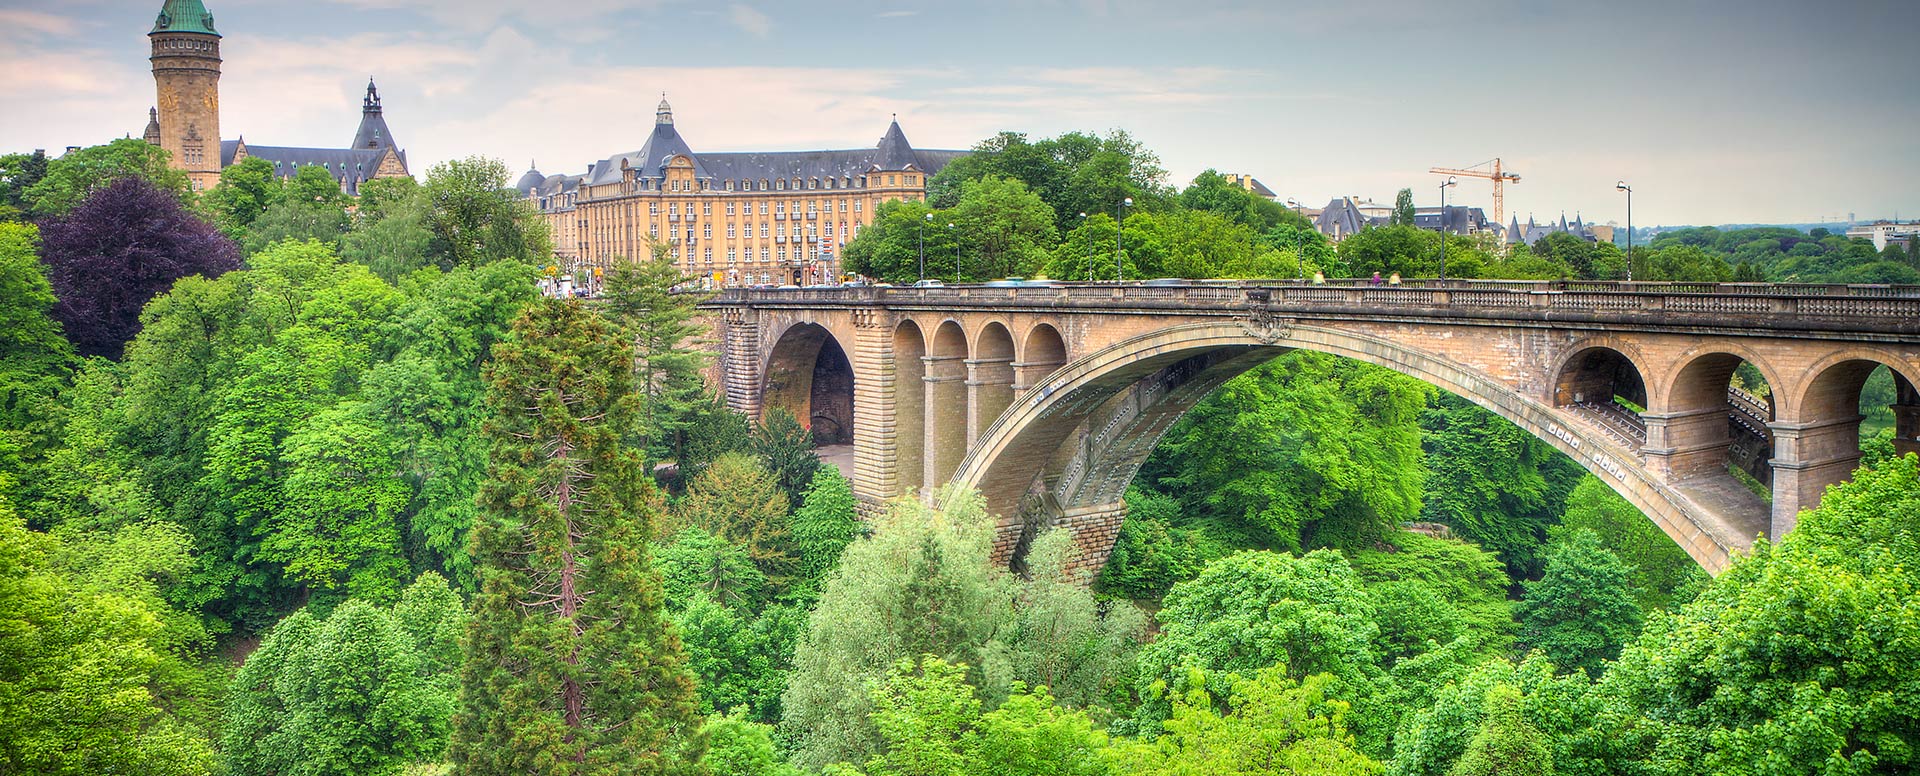 Discounted flight tickets to Luxembourg - IFlyFirstClass